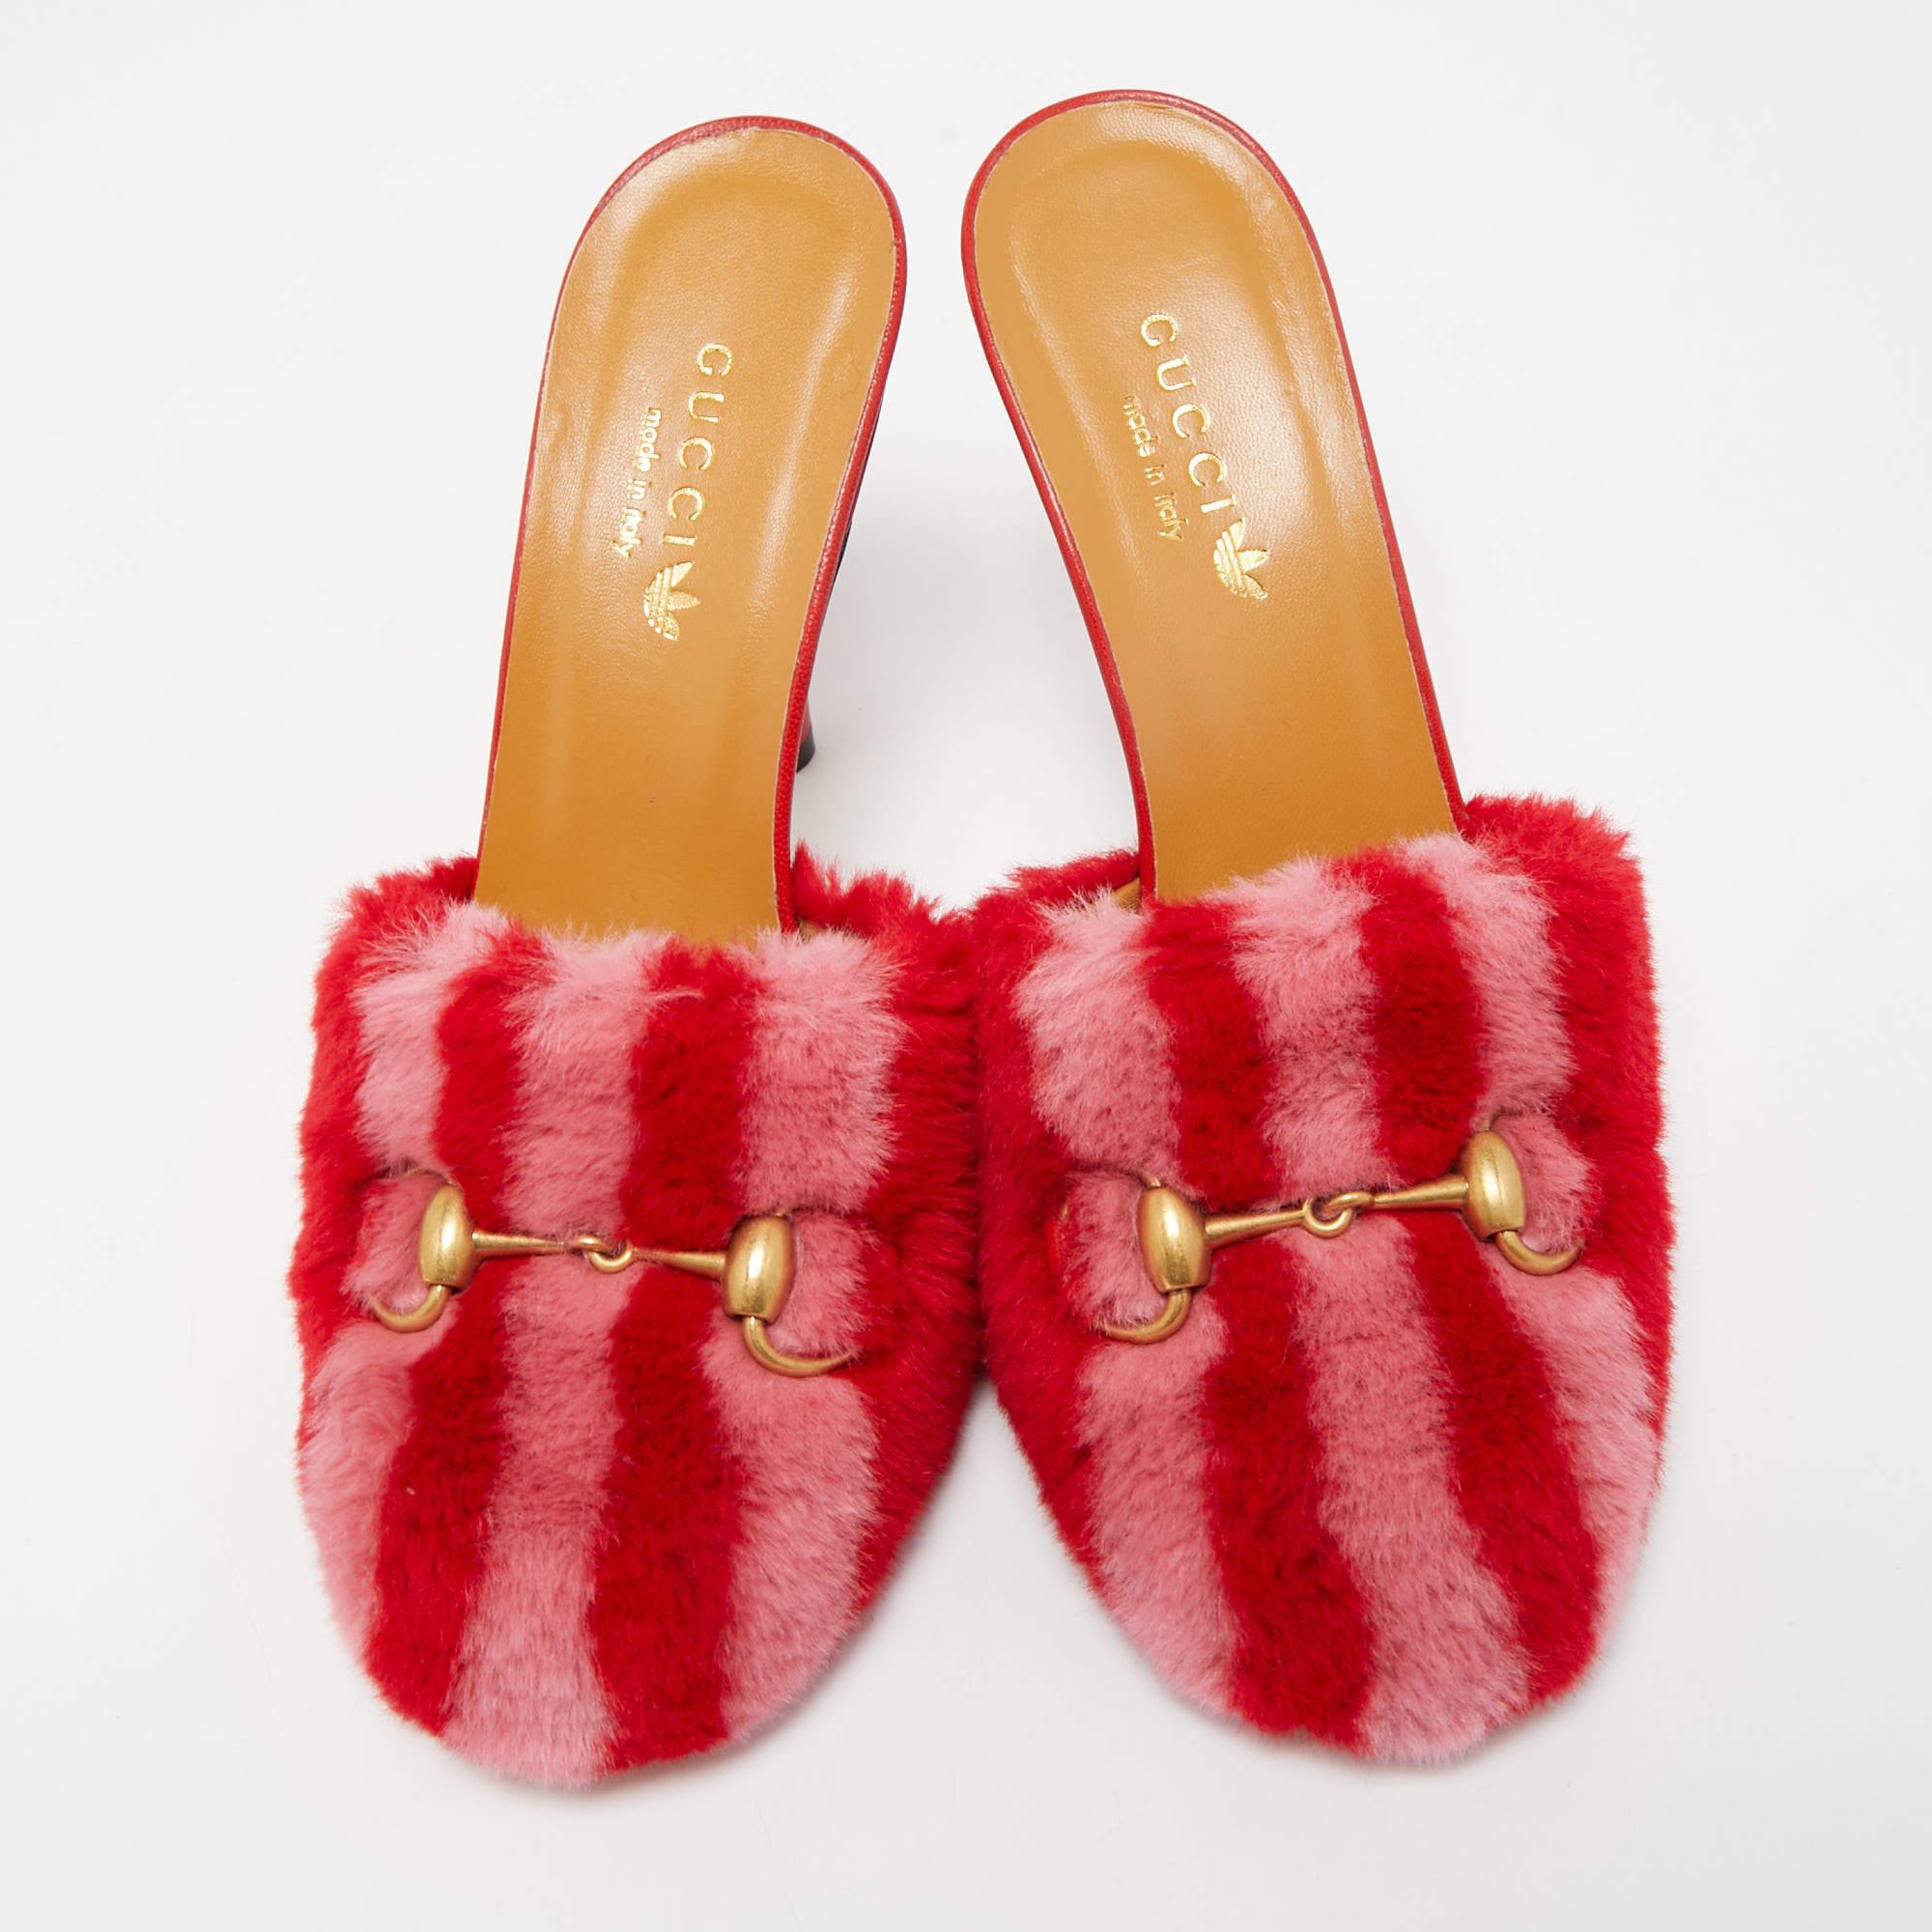 The Gucci x Adidas Red/Pink Shearling Fur Horsebit Mules are a luxurious blend of fashion and comfort. These stylish mules feature a striking red and pink color scheme, adorned with the iconic Horsebit detail. The soft, shearling fur lining adds